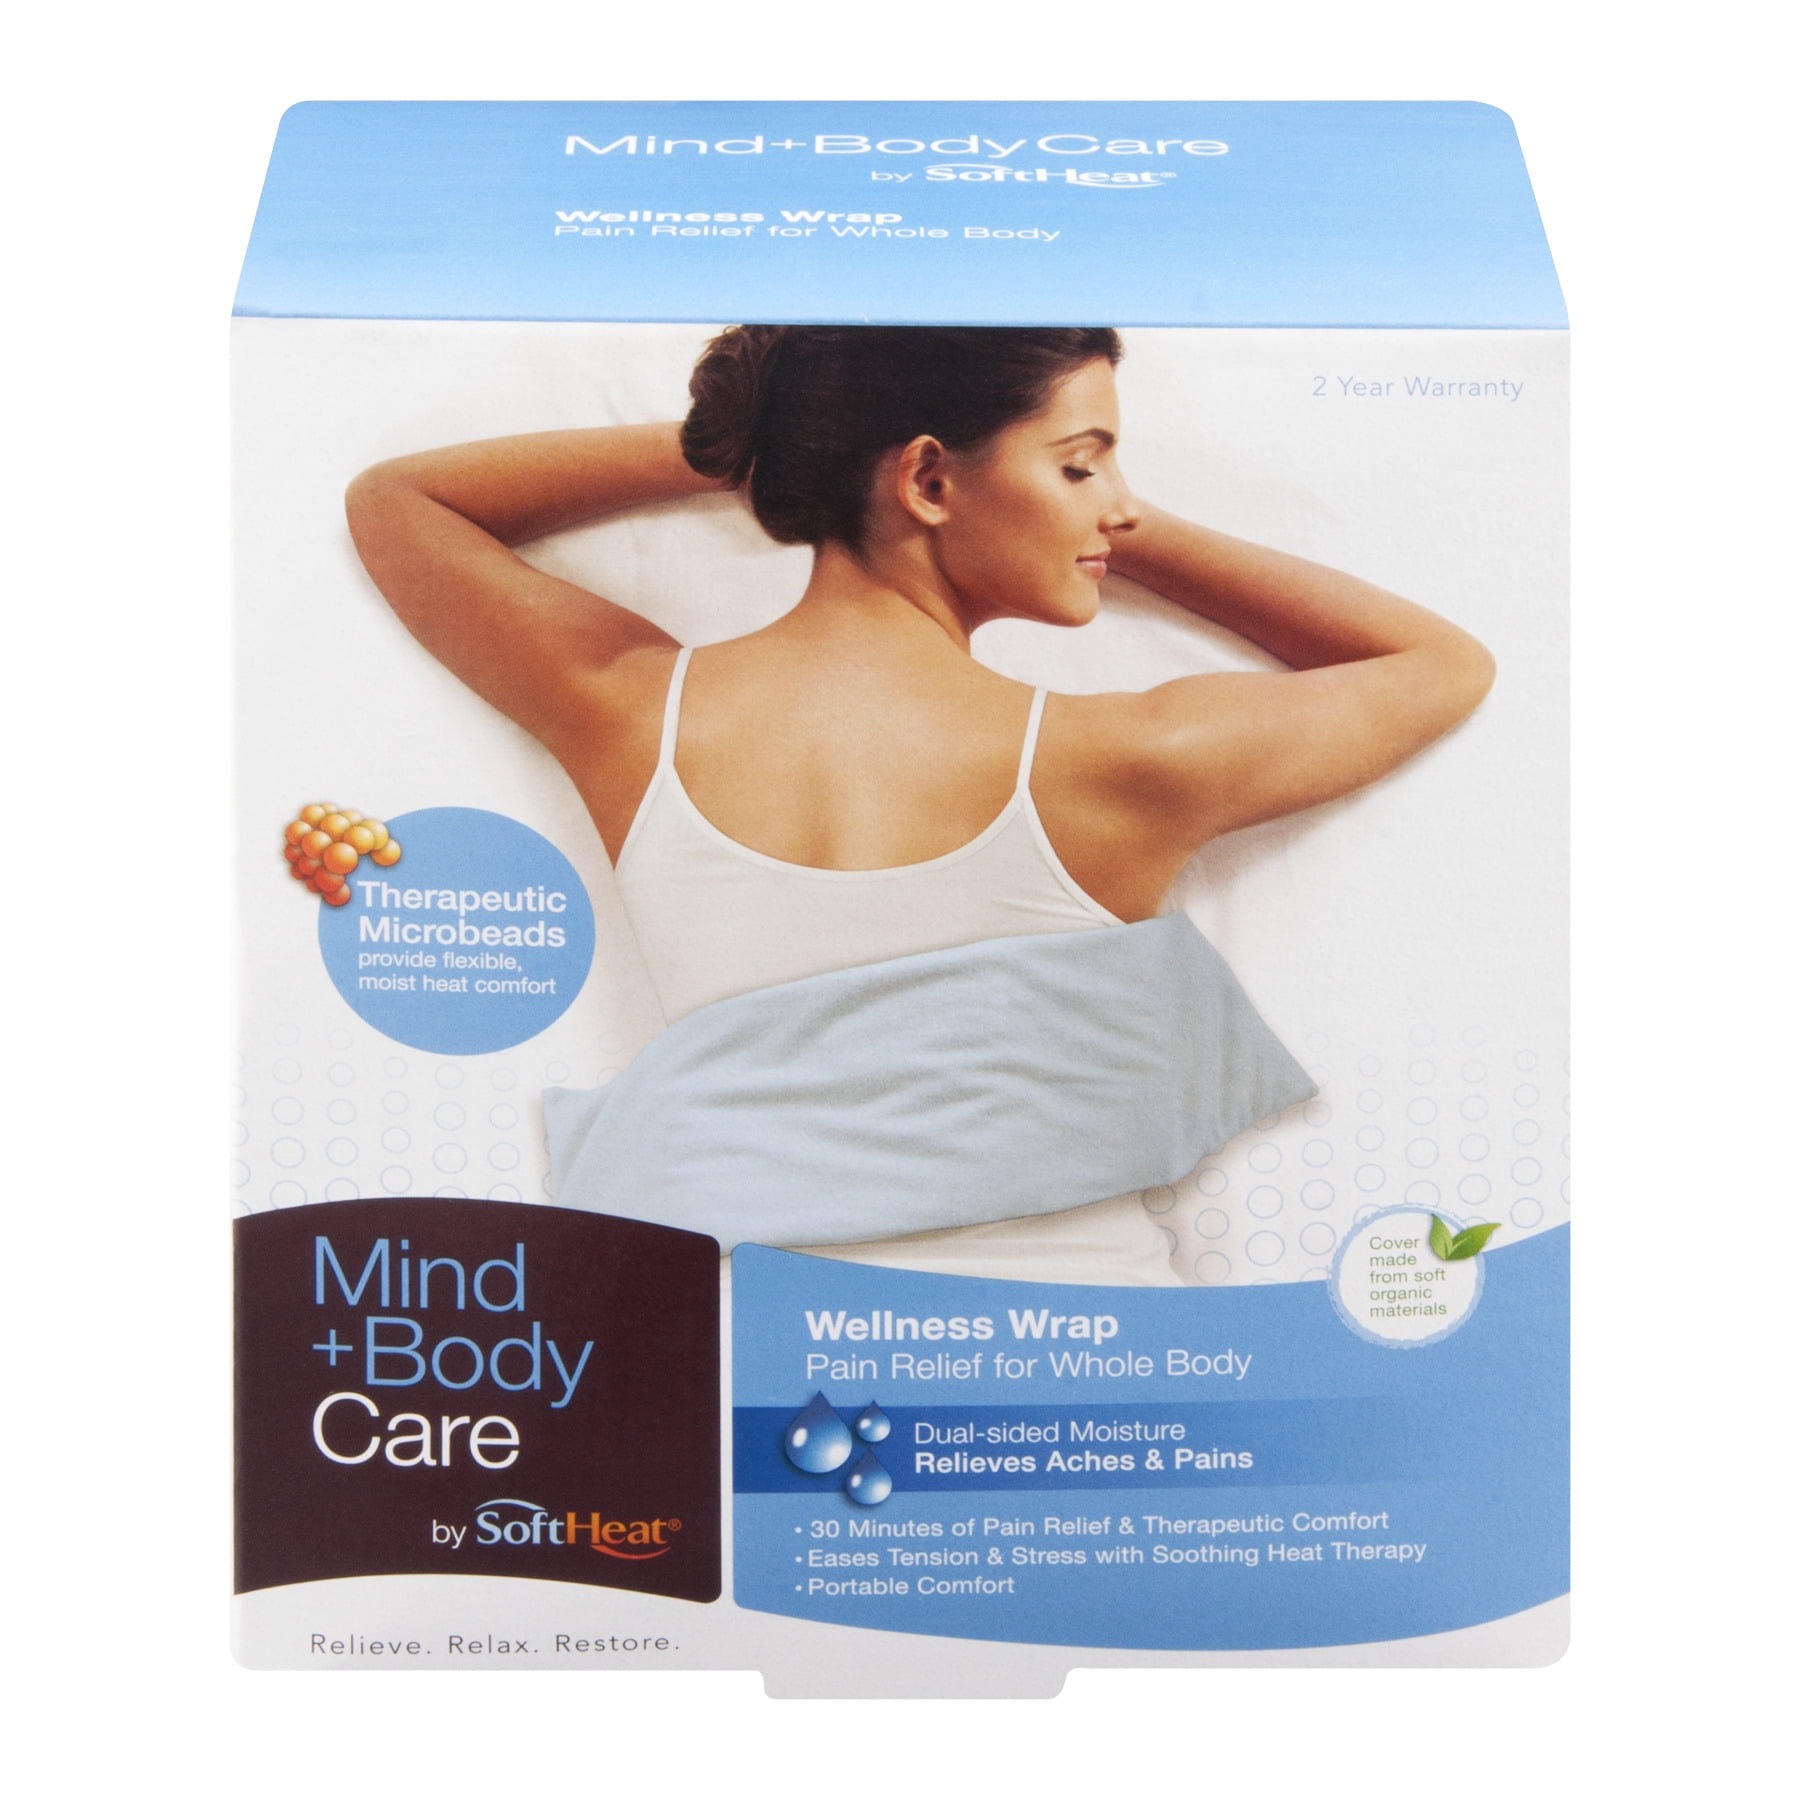 Thrive Body Wrap - Hot & Cold Therapy - Natural Clay Beads - Provides Moist Heat or Soothing Cool Stress and Pain Relief